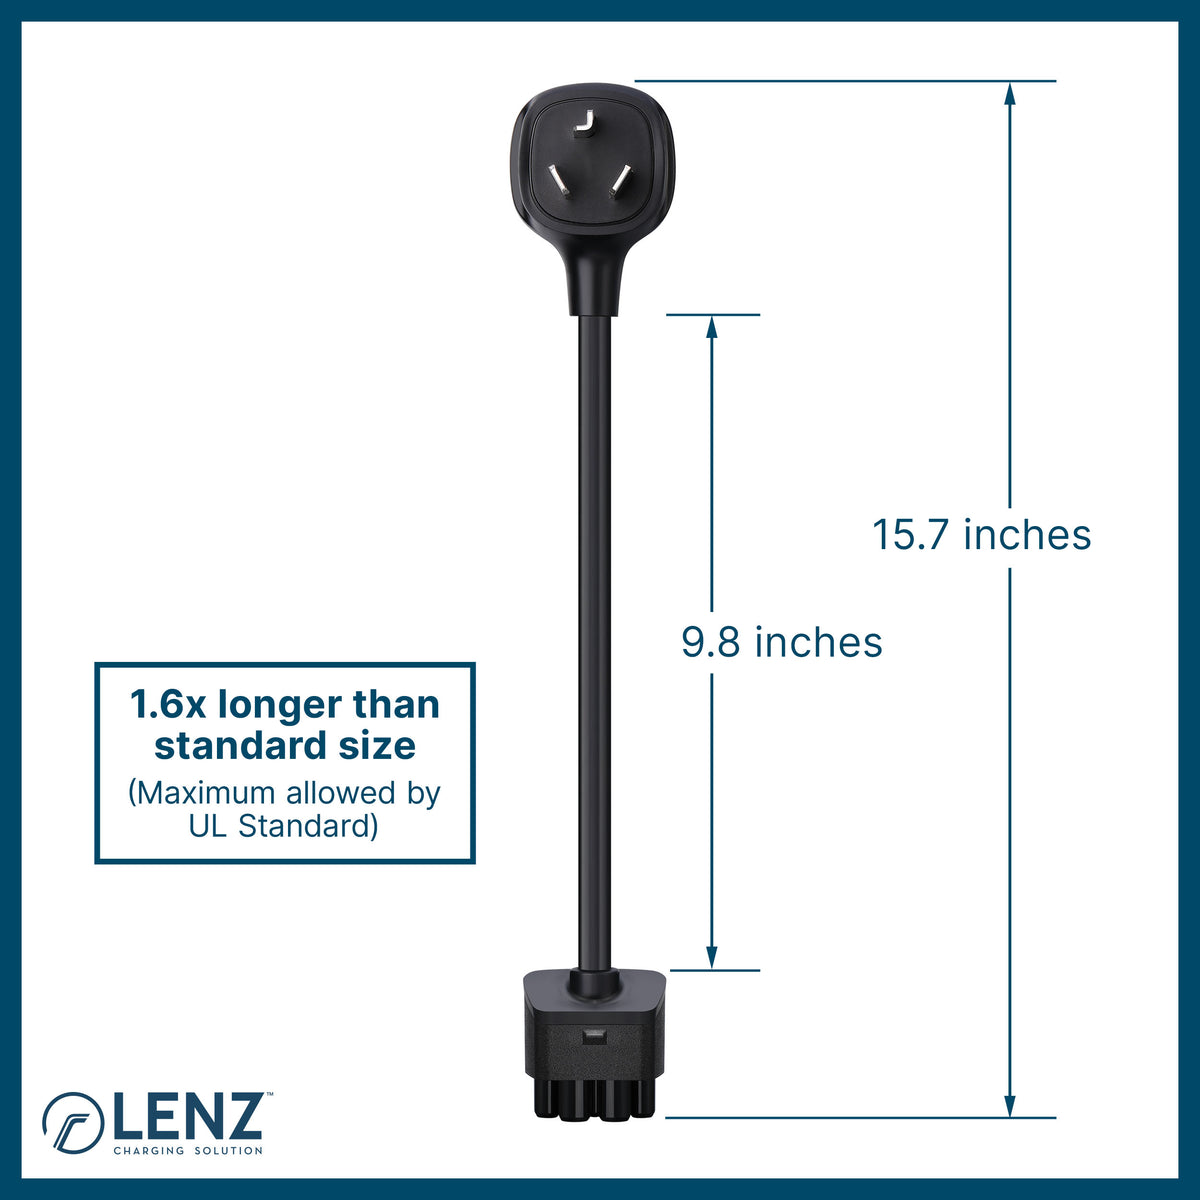 LENZ NEMA 10-30 Adapter for Tesla Gen 2 Mobile Connector Measures 15.7 inches end-to-end